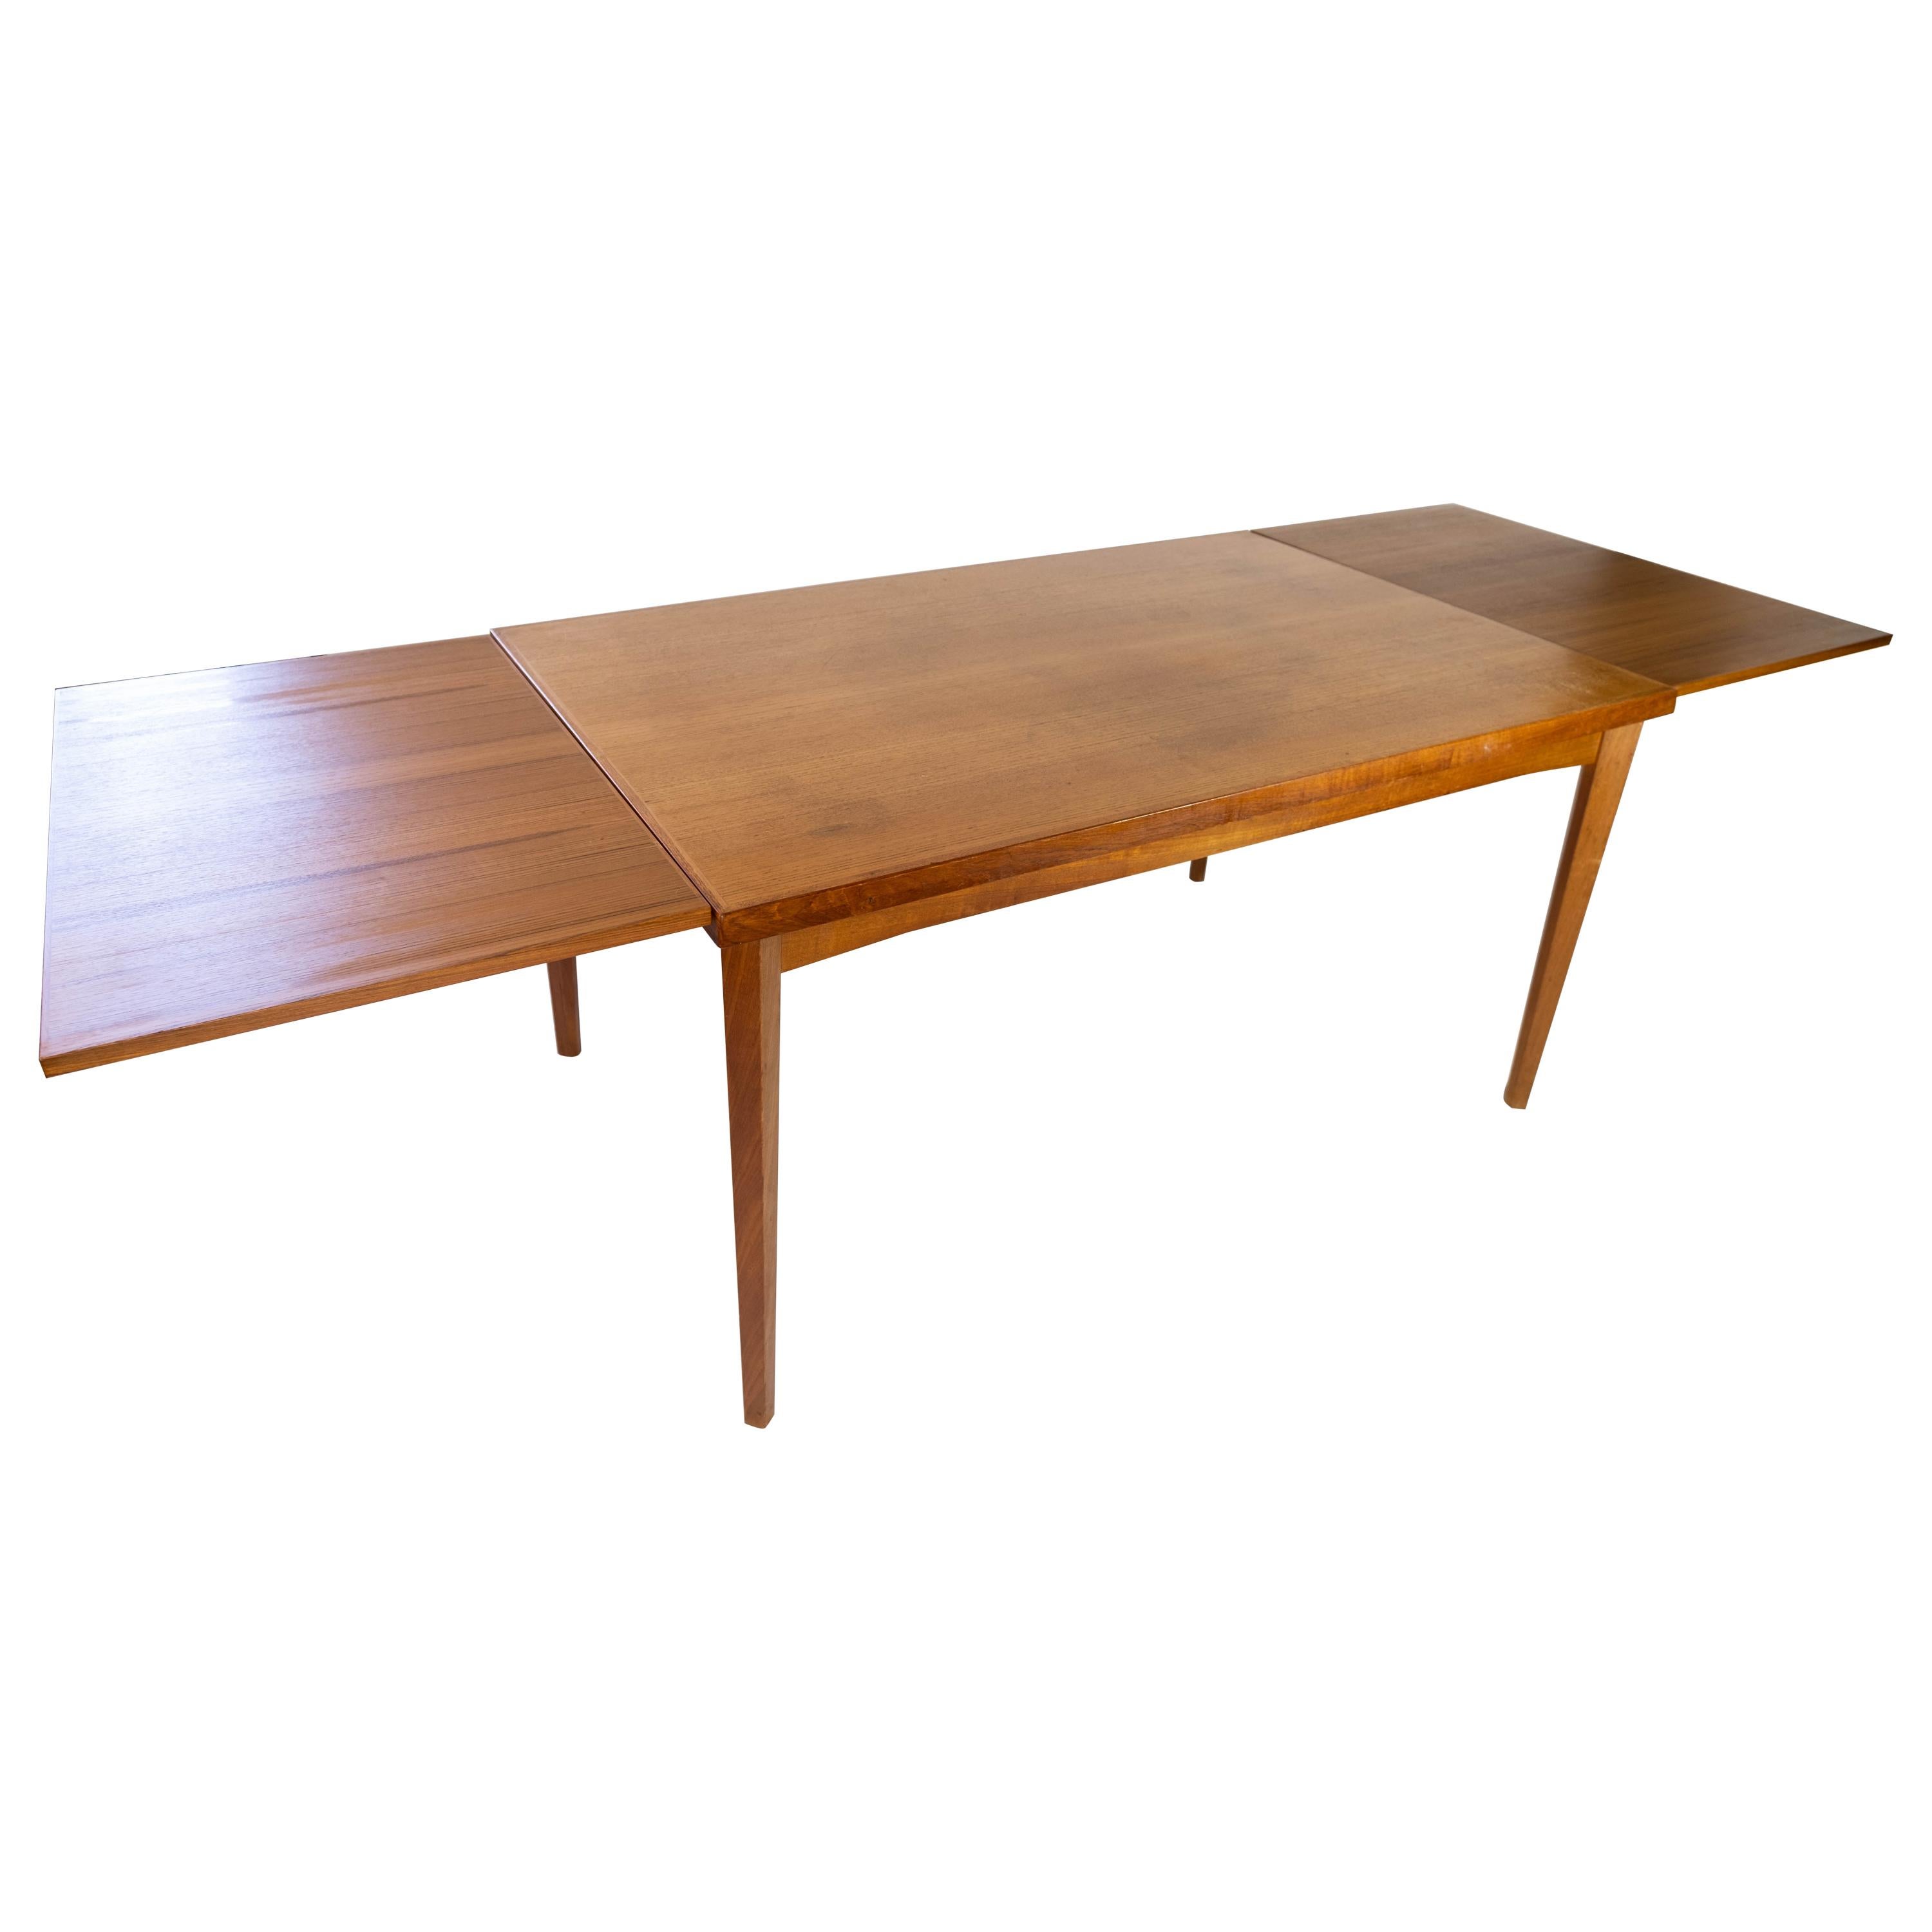 Dining Table With Extensions Made In Teak, Danish Design From 1960s